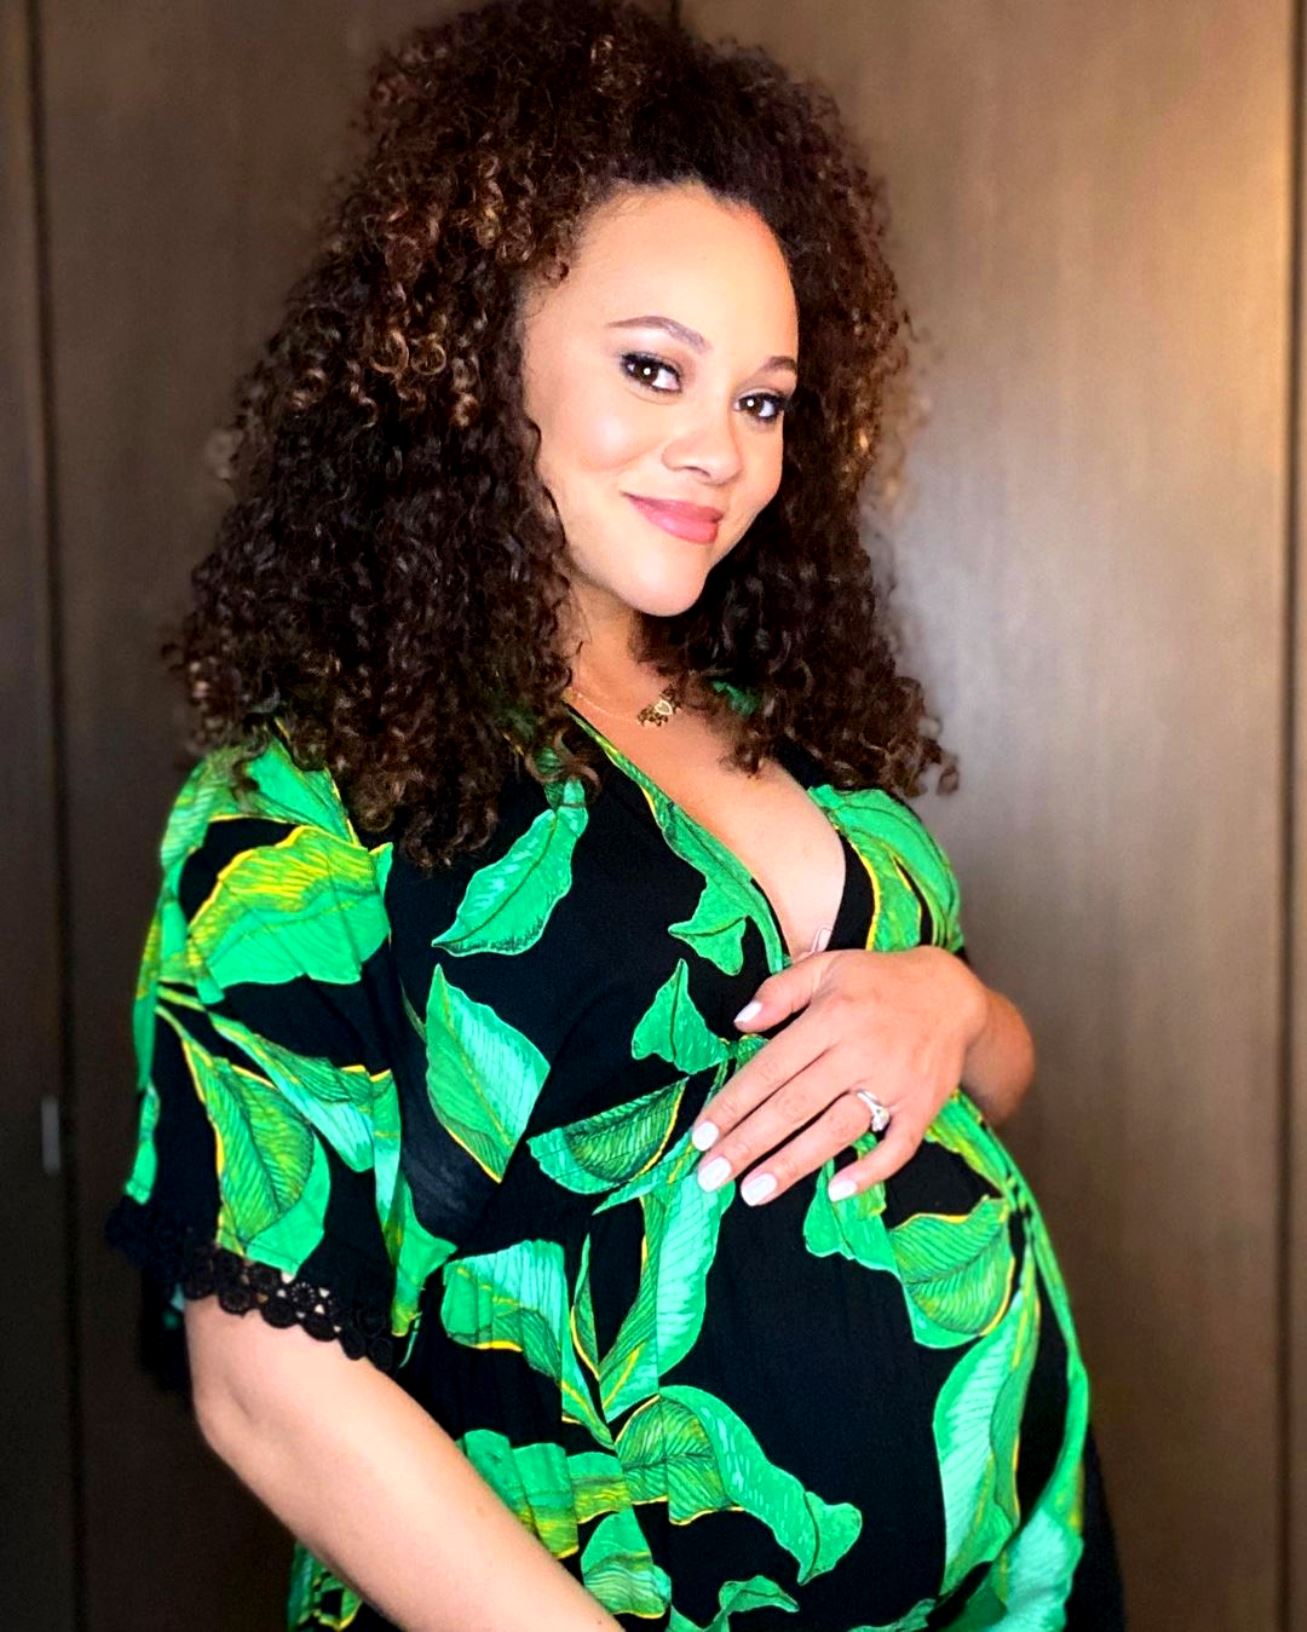 PHOTOS: RHOP Star Ashley Darby Gives Birth to Second Son, Get the First Look at Her New Baby Boy as Husband Michael Cares for Dean